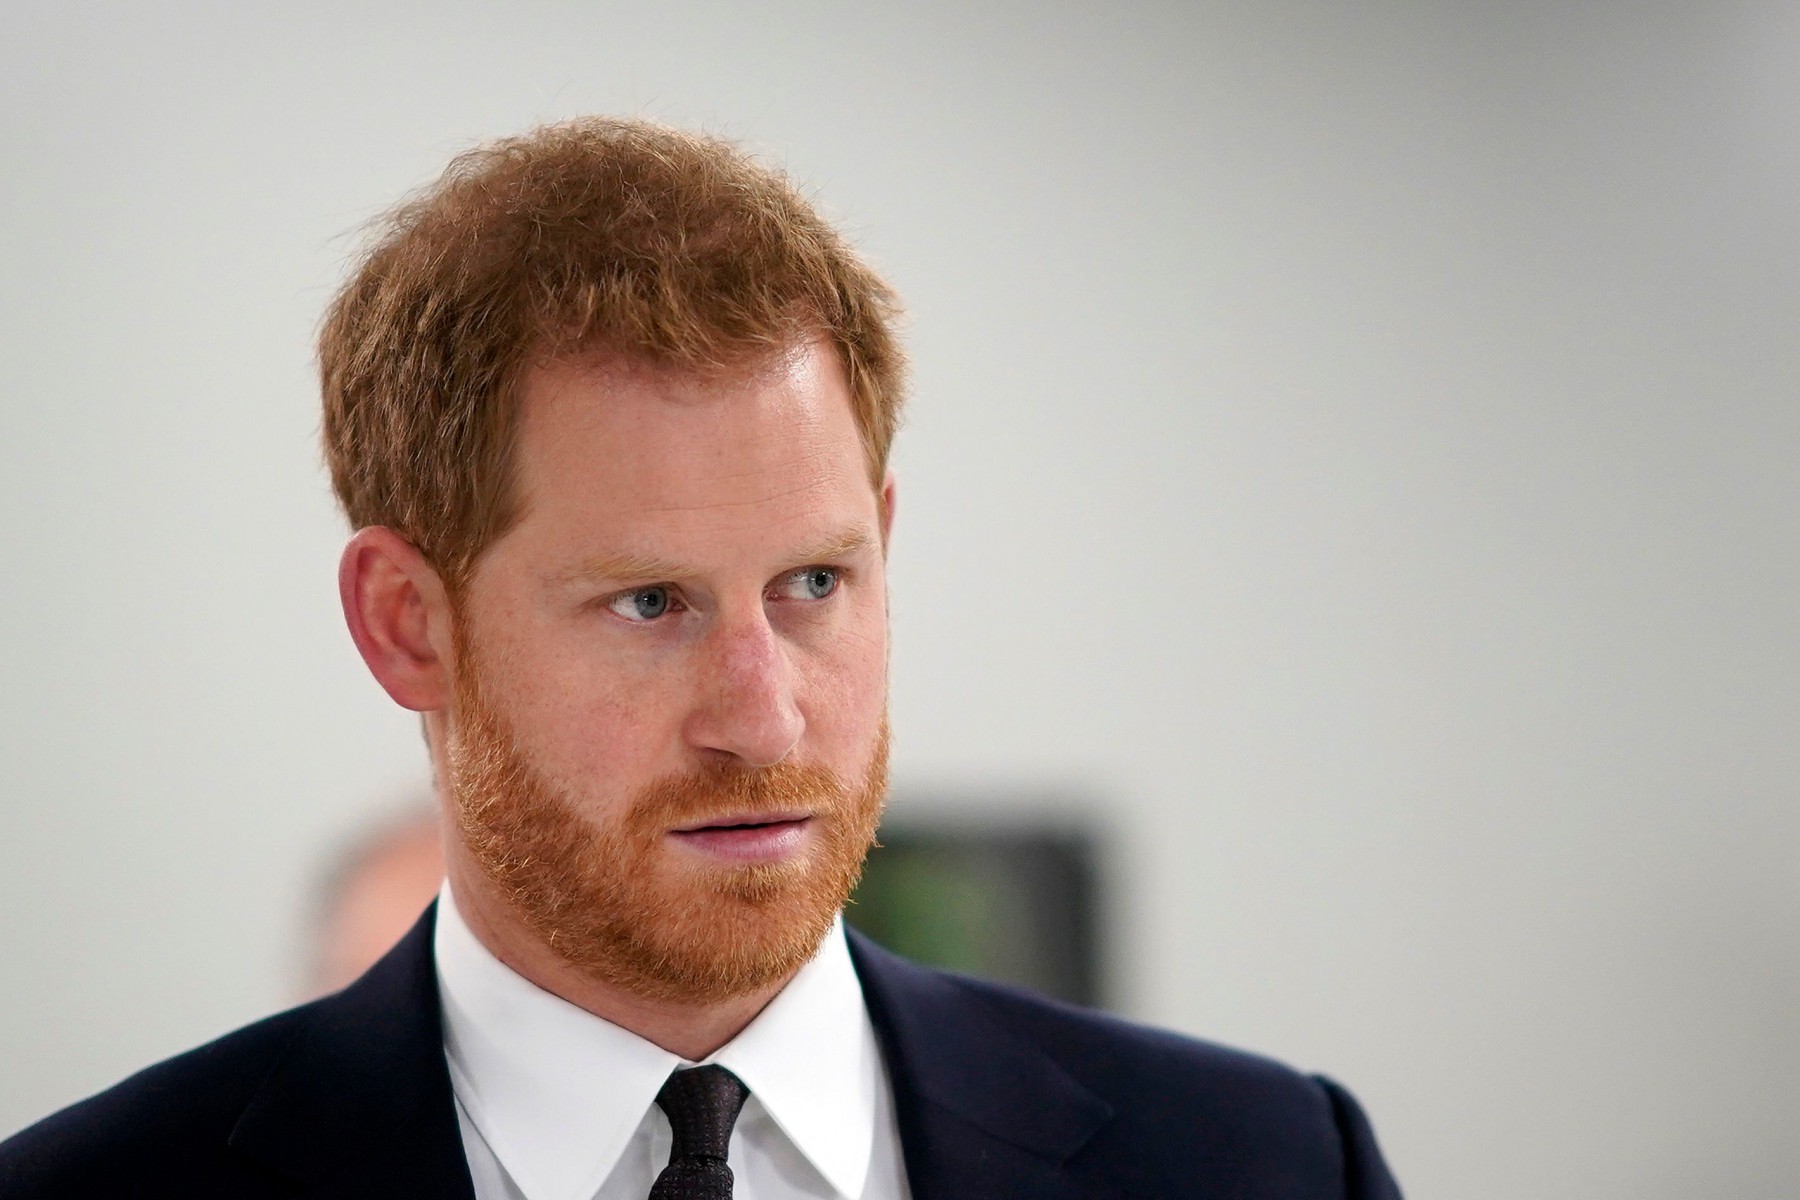 The ex-Commando also slammed Harry for not discussing his plans with the Queen beforehand